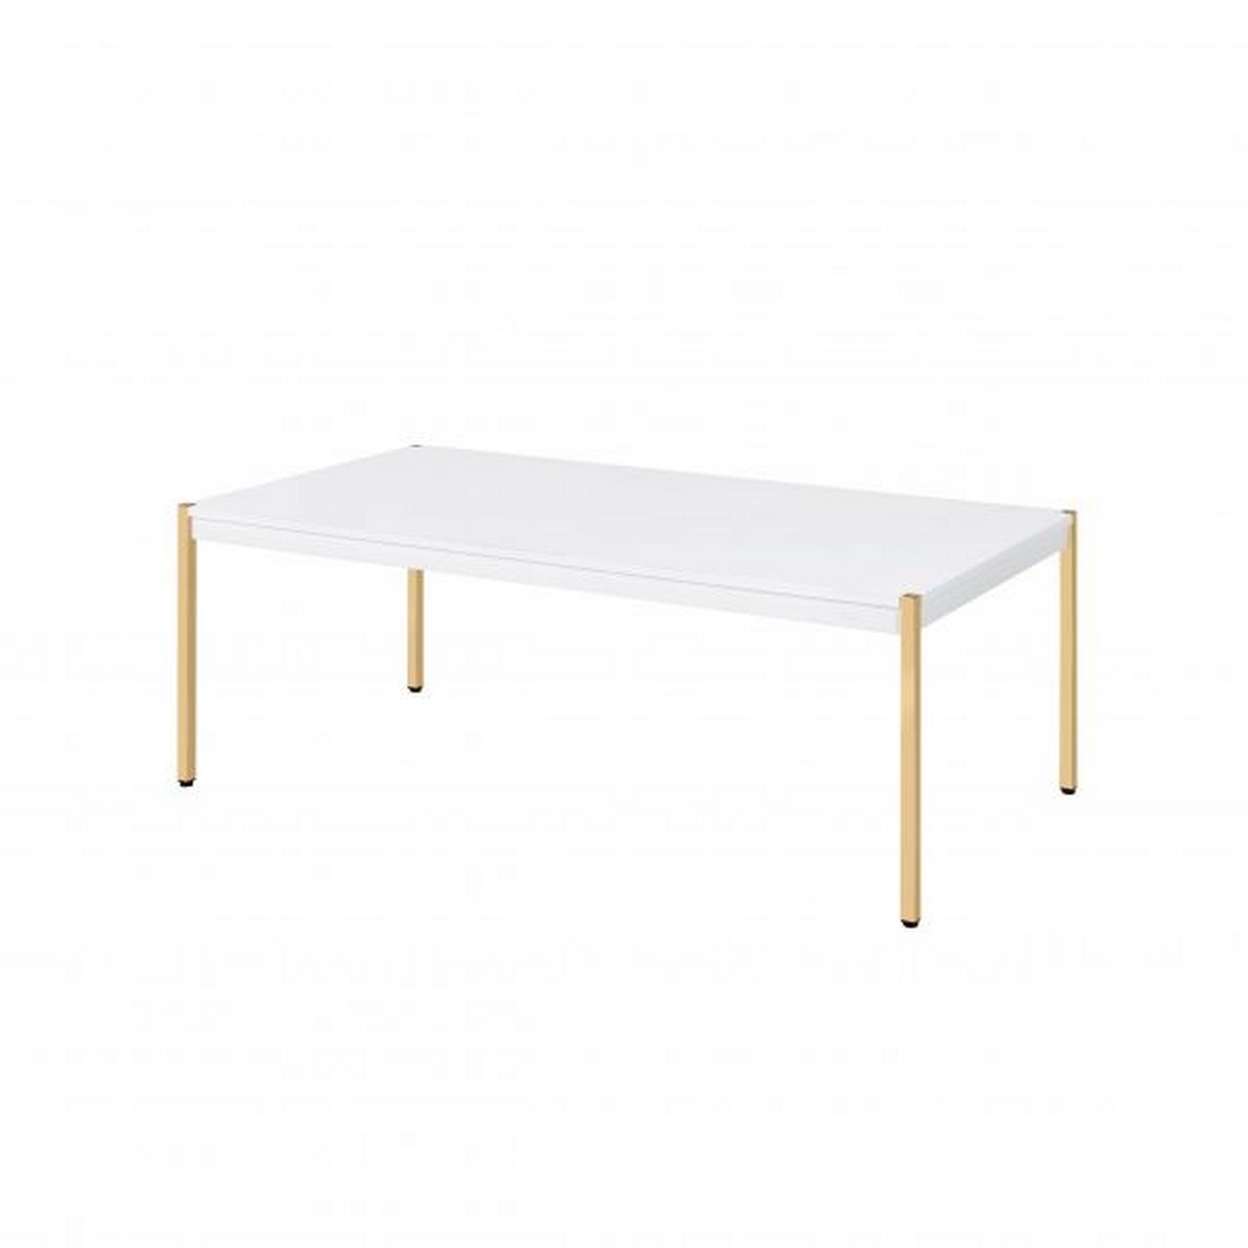 Coffee Table With Metal Tube Legs, White And Gold- Saltoro Sherpi